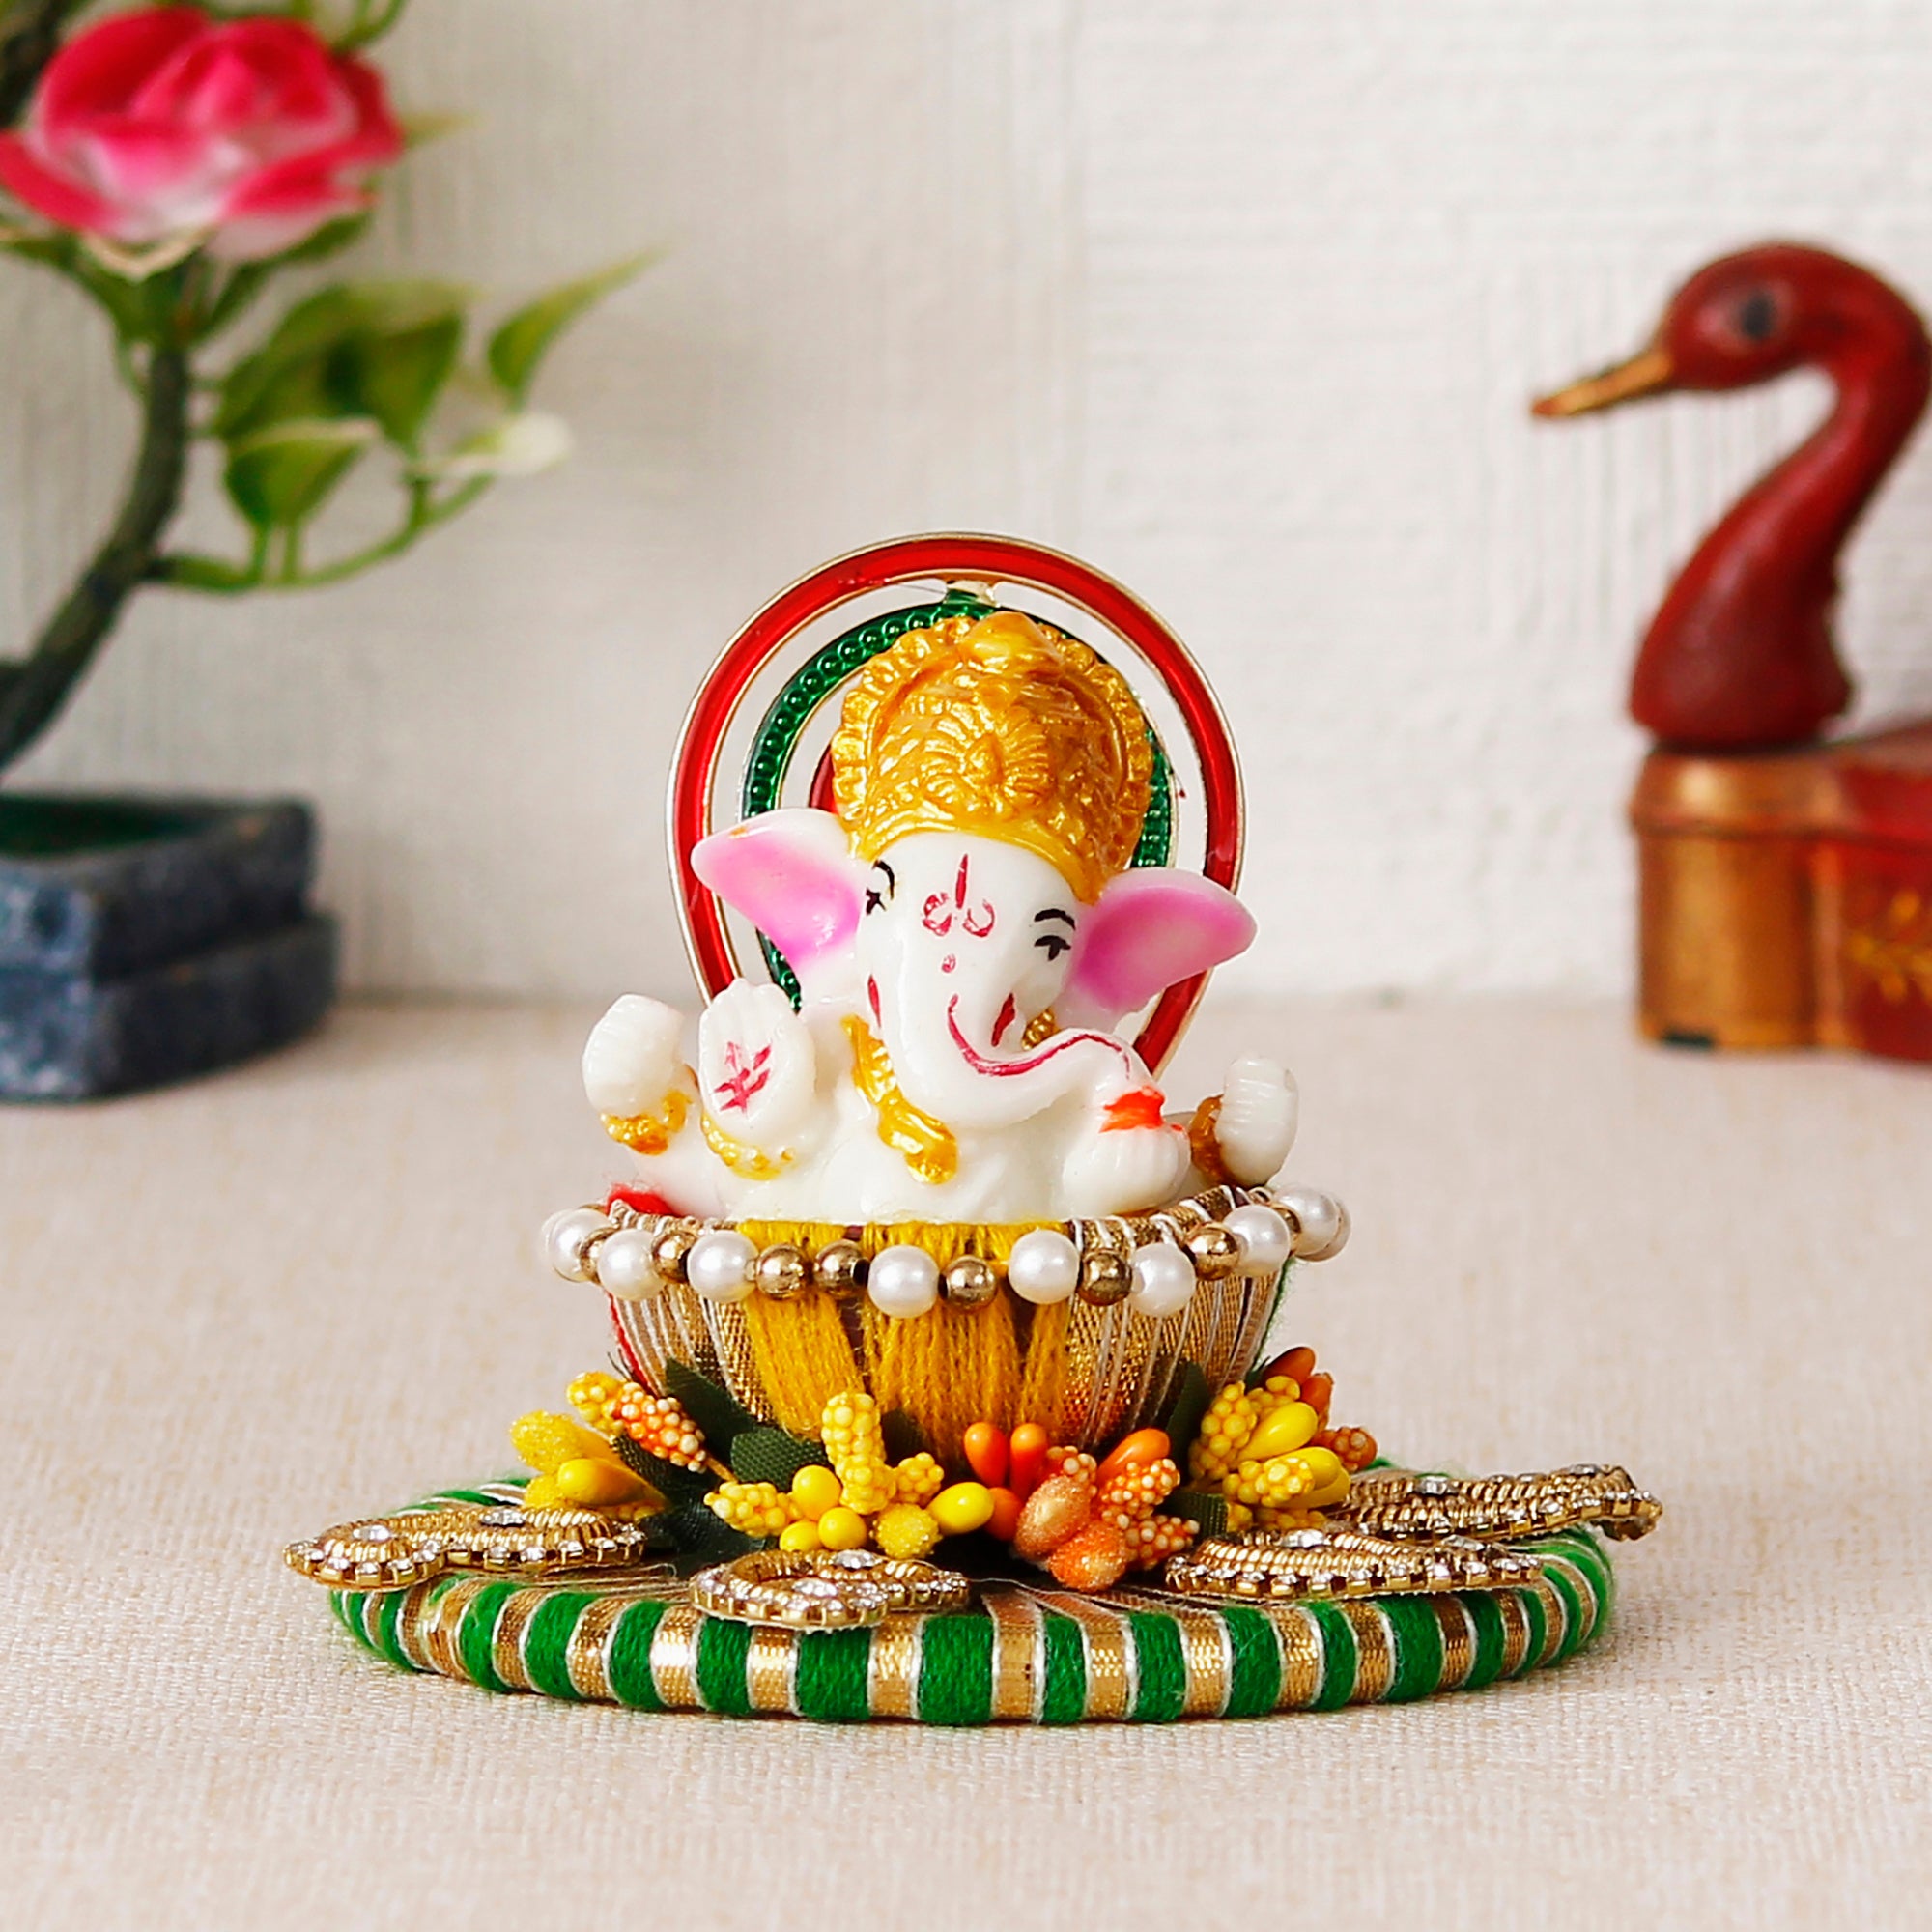 Lord Ganesha Idol on Decorative Handcrafted Singhasan for Home/Temple/Office/Car Dashboard